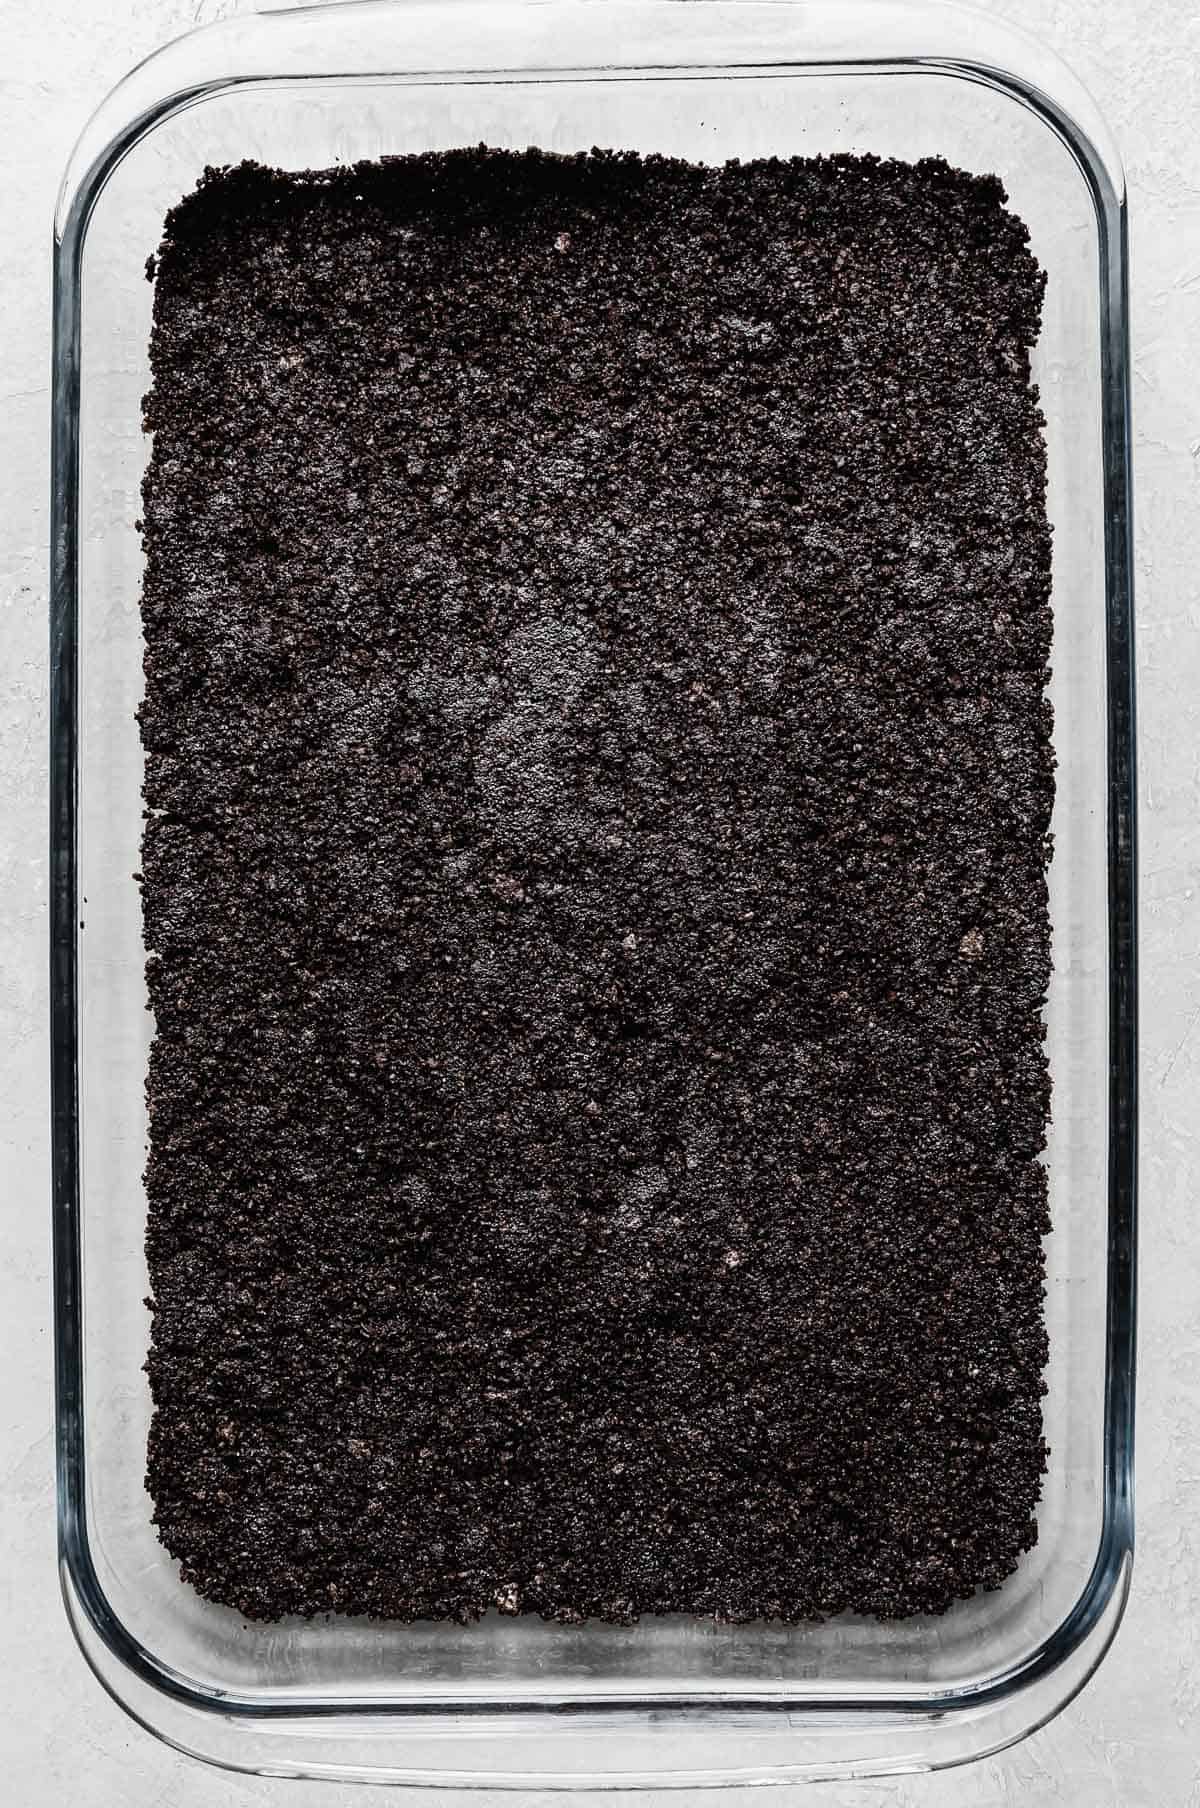 A rectangular glass dish with Oreo crust pressed along the bottom of the pan.